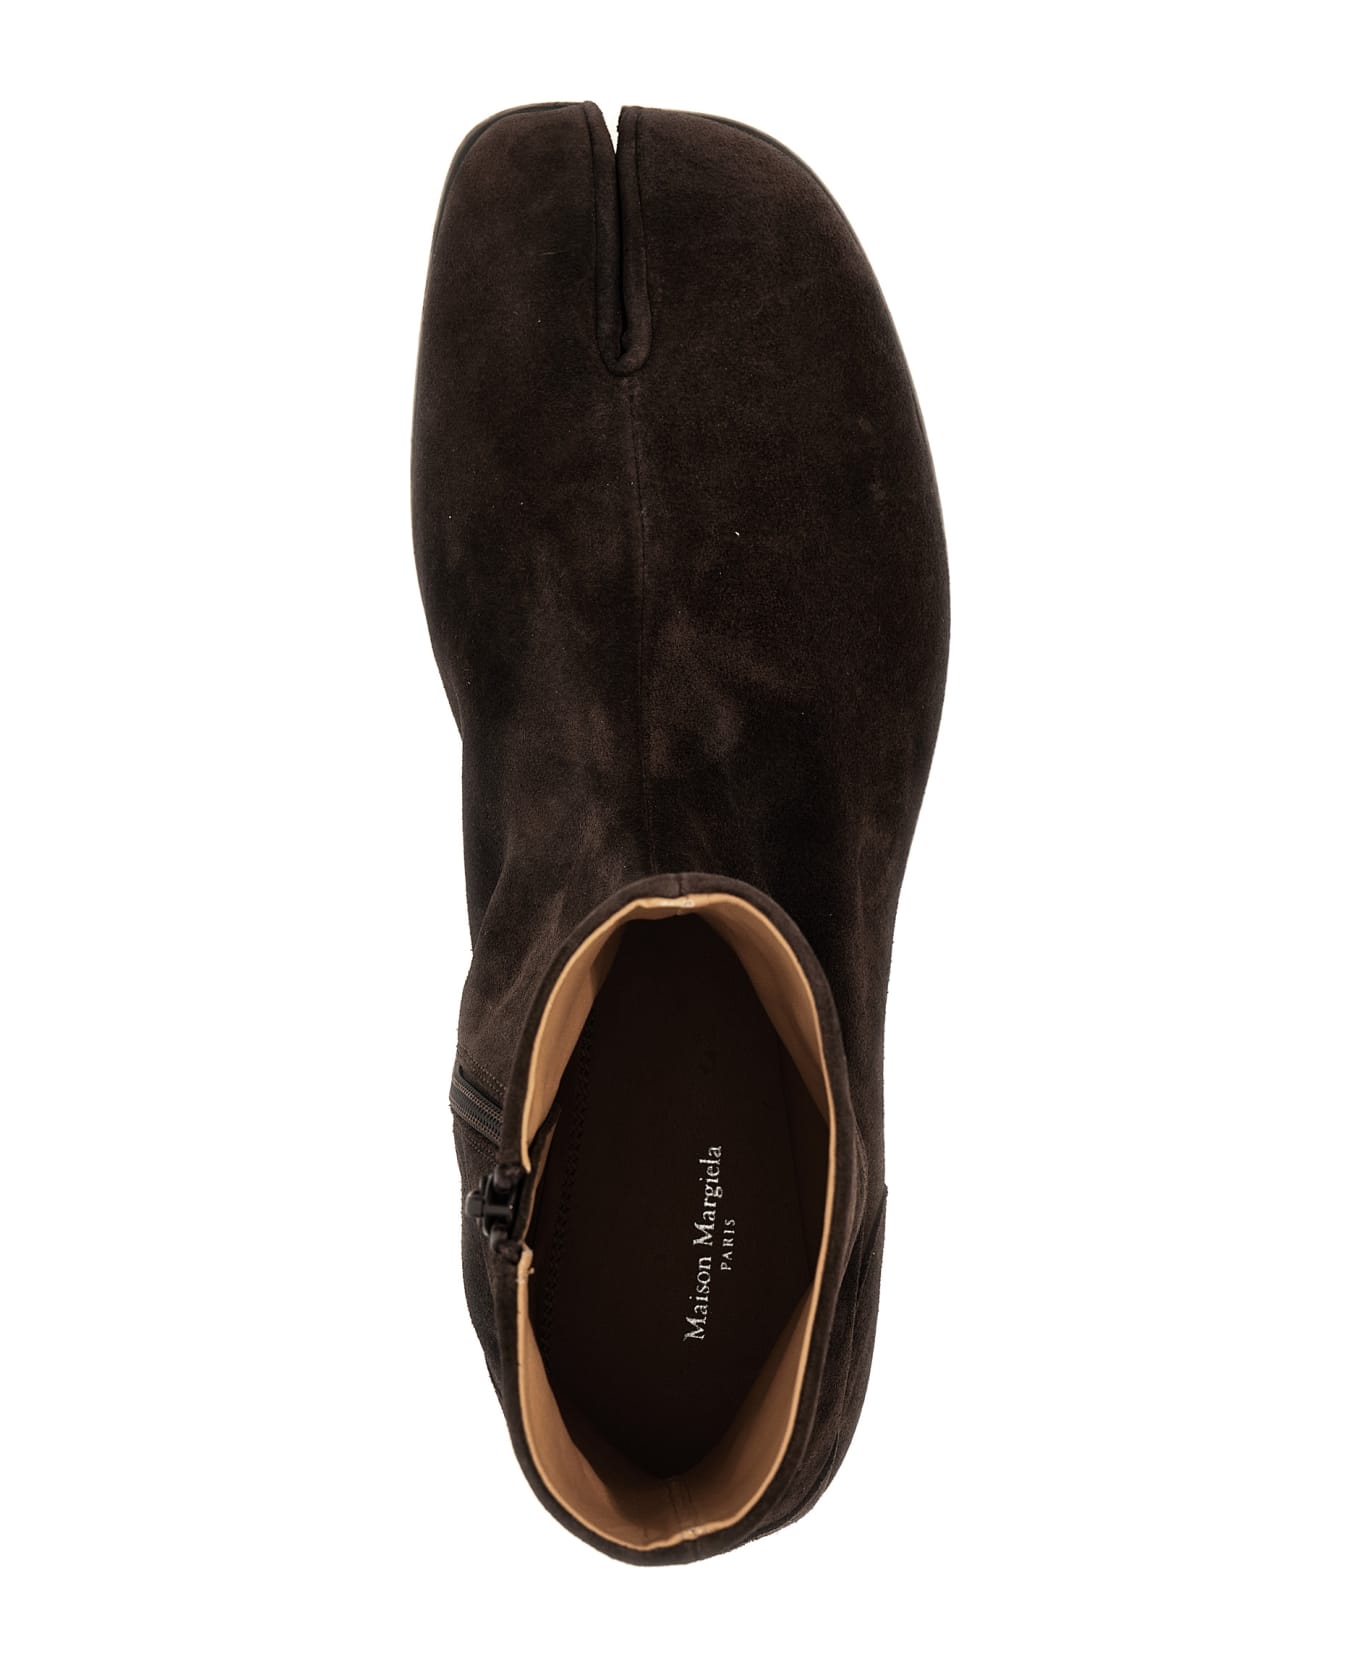 Maison Margiela Tabi Ankle Boots - Brown ブーツ